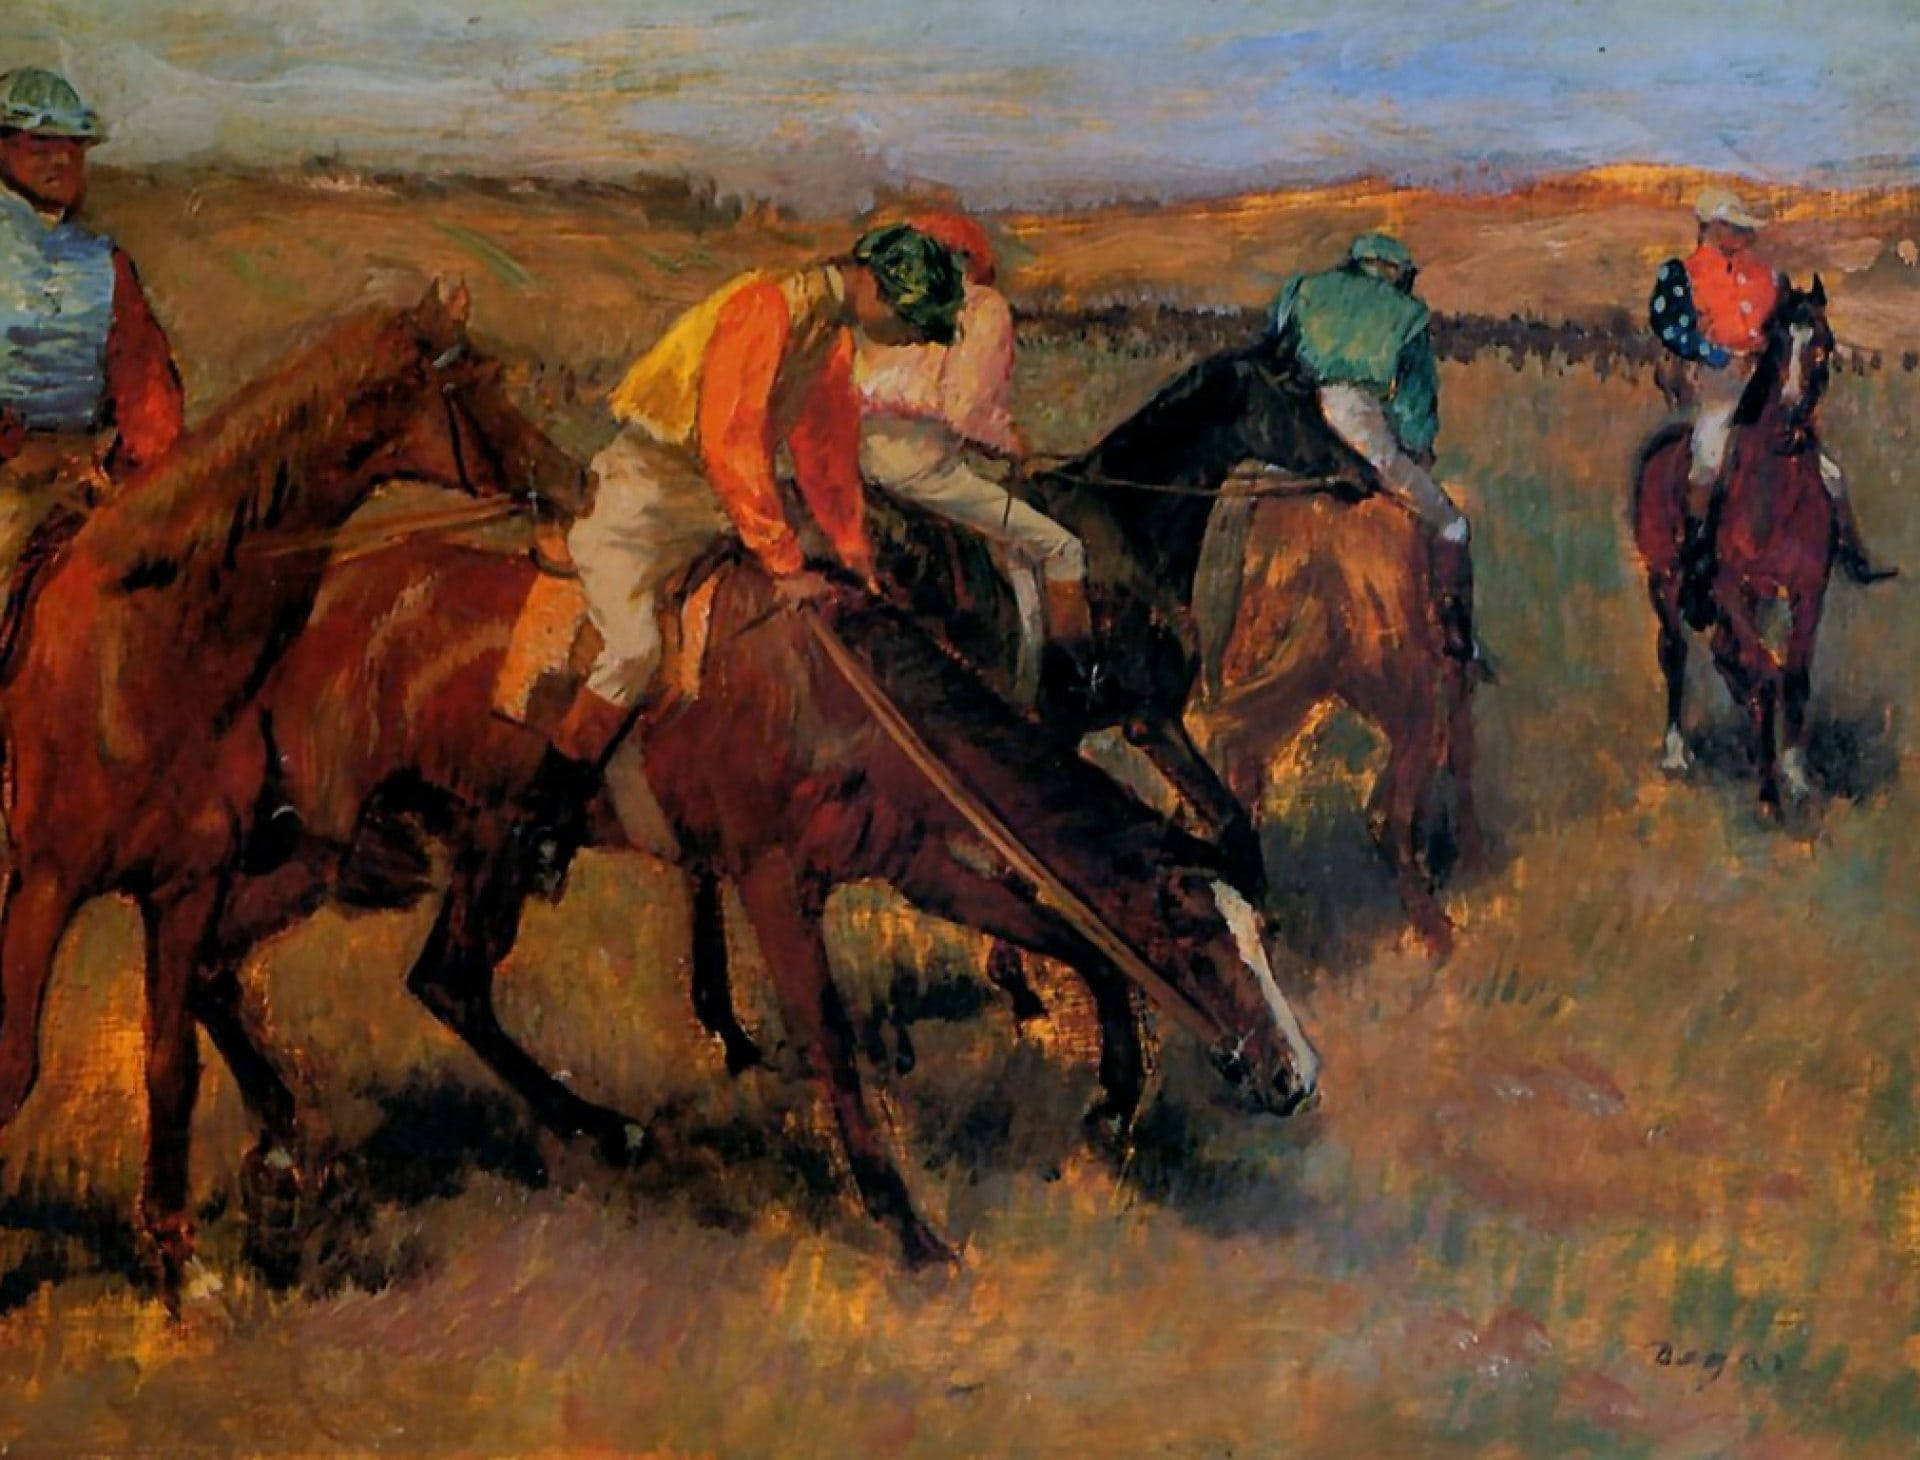 Edgar Degas Before The Race Painting Background